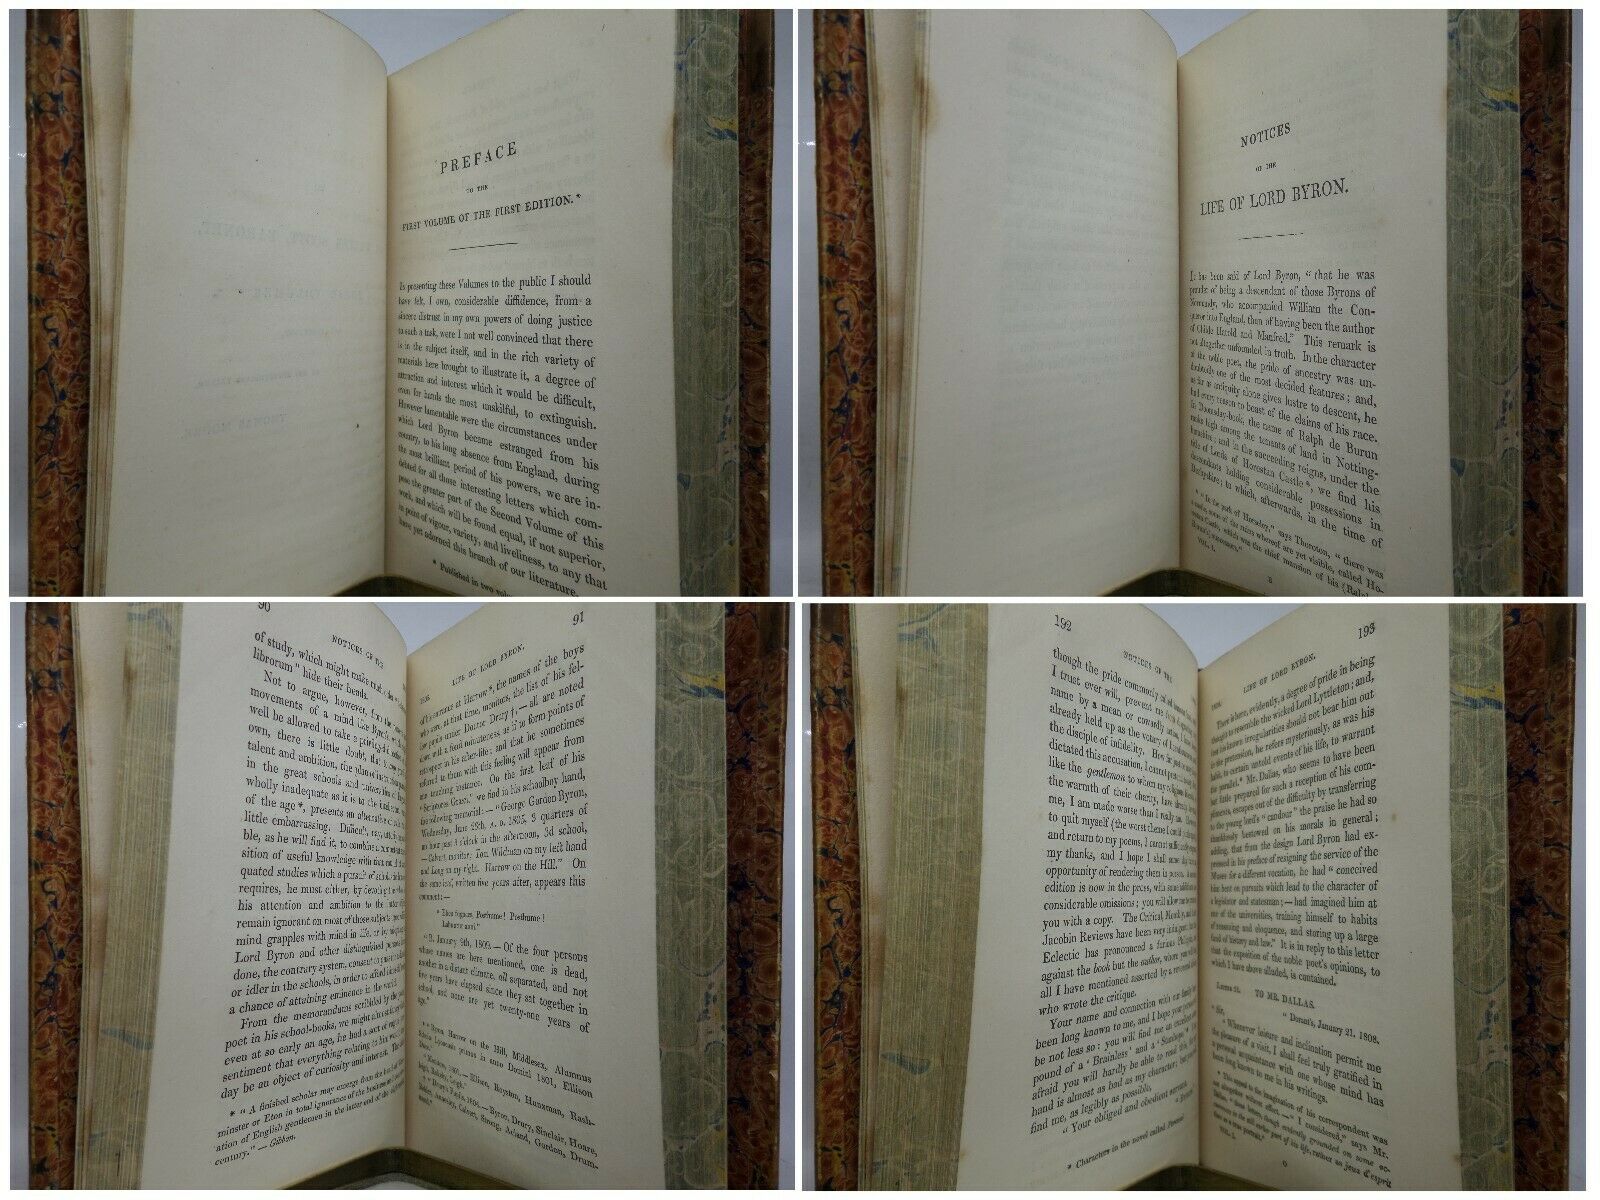 THE POETICAL WORKS OF LORD BYRON IN 17 VOLUMES 1832-1833 FINE LEATHER-BINDINGS